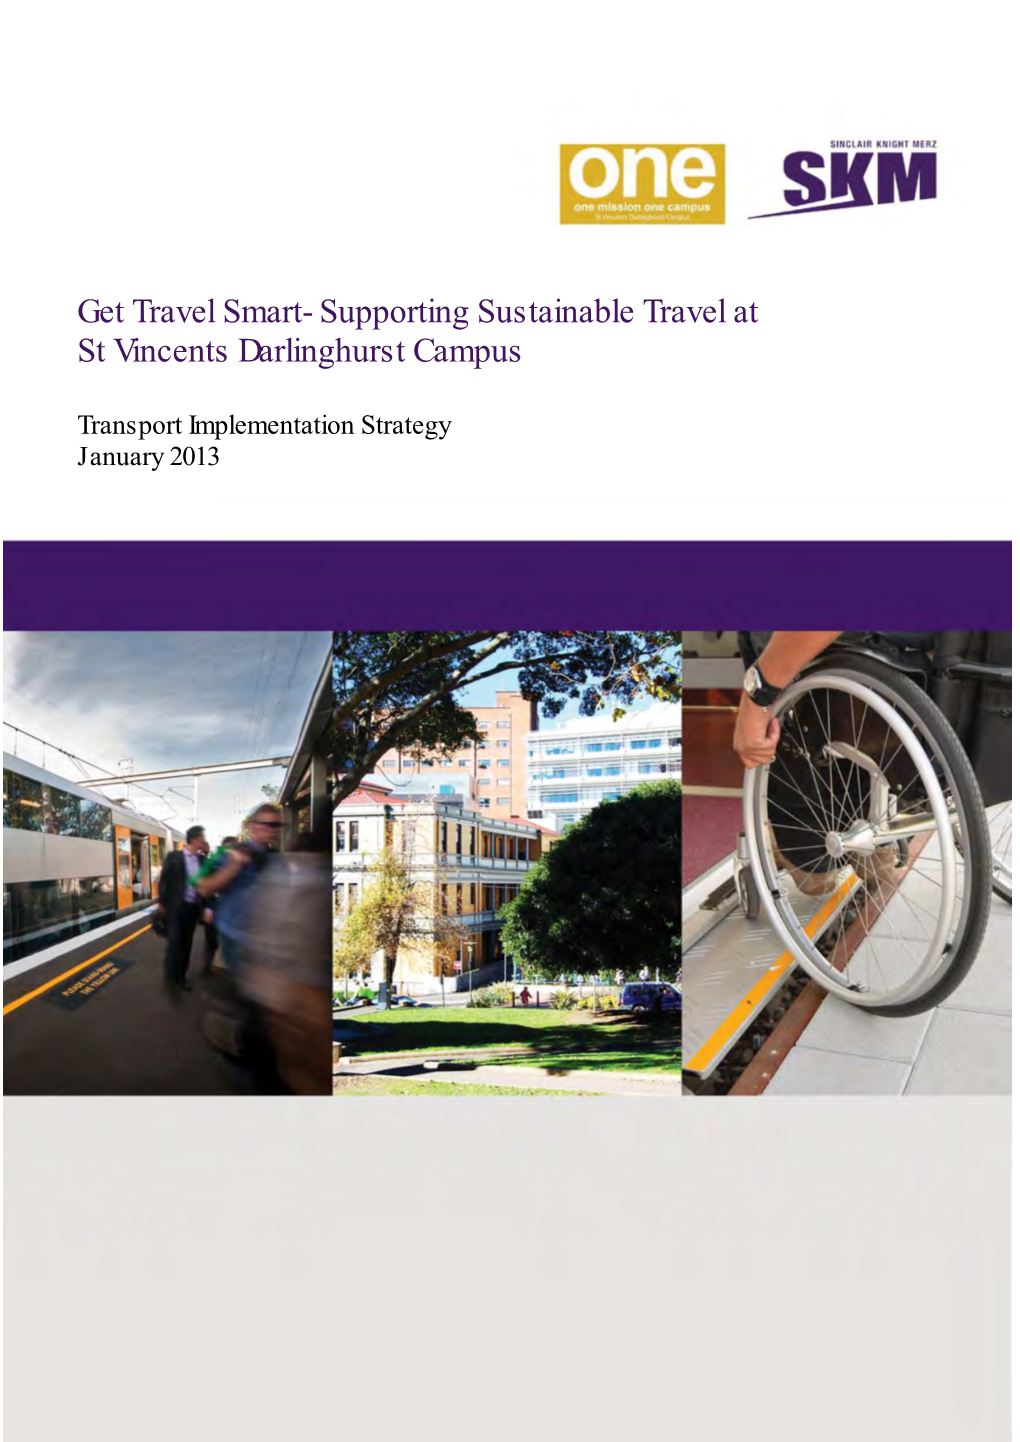 Supporting Sustainable Travel at St Vincents Darlinghurst Campus